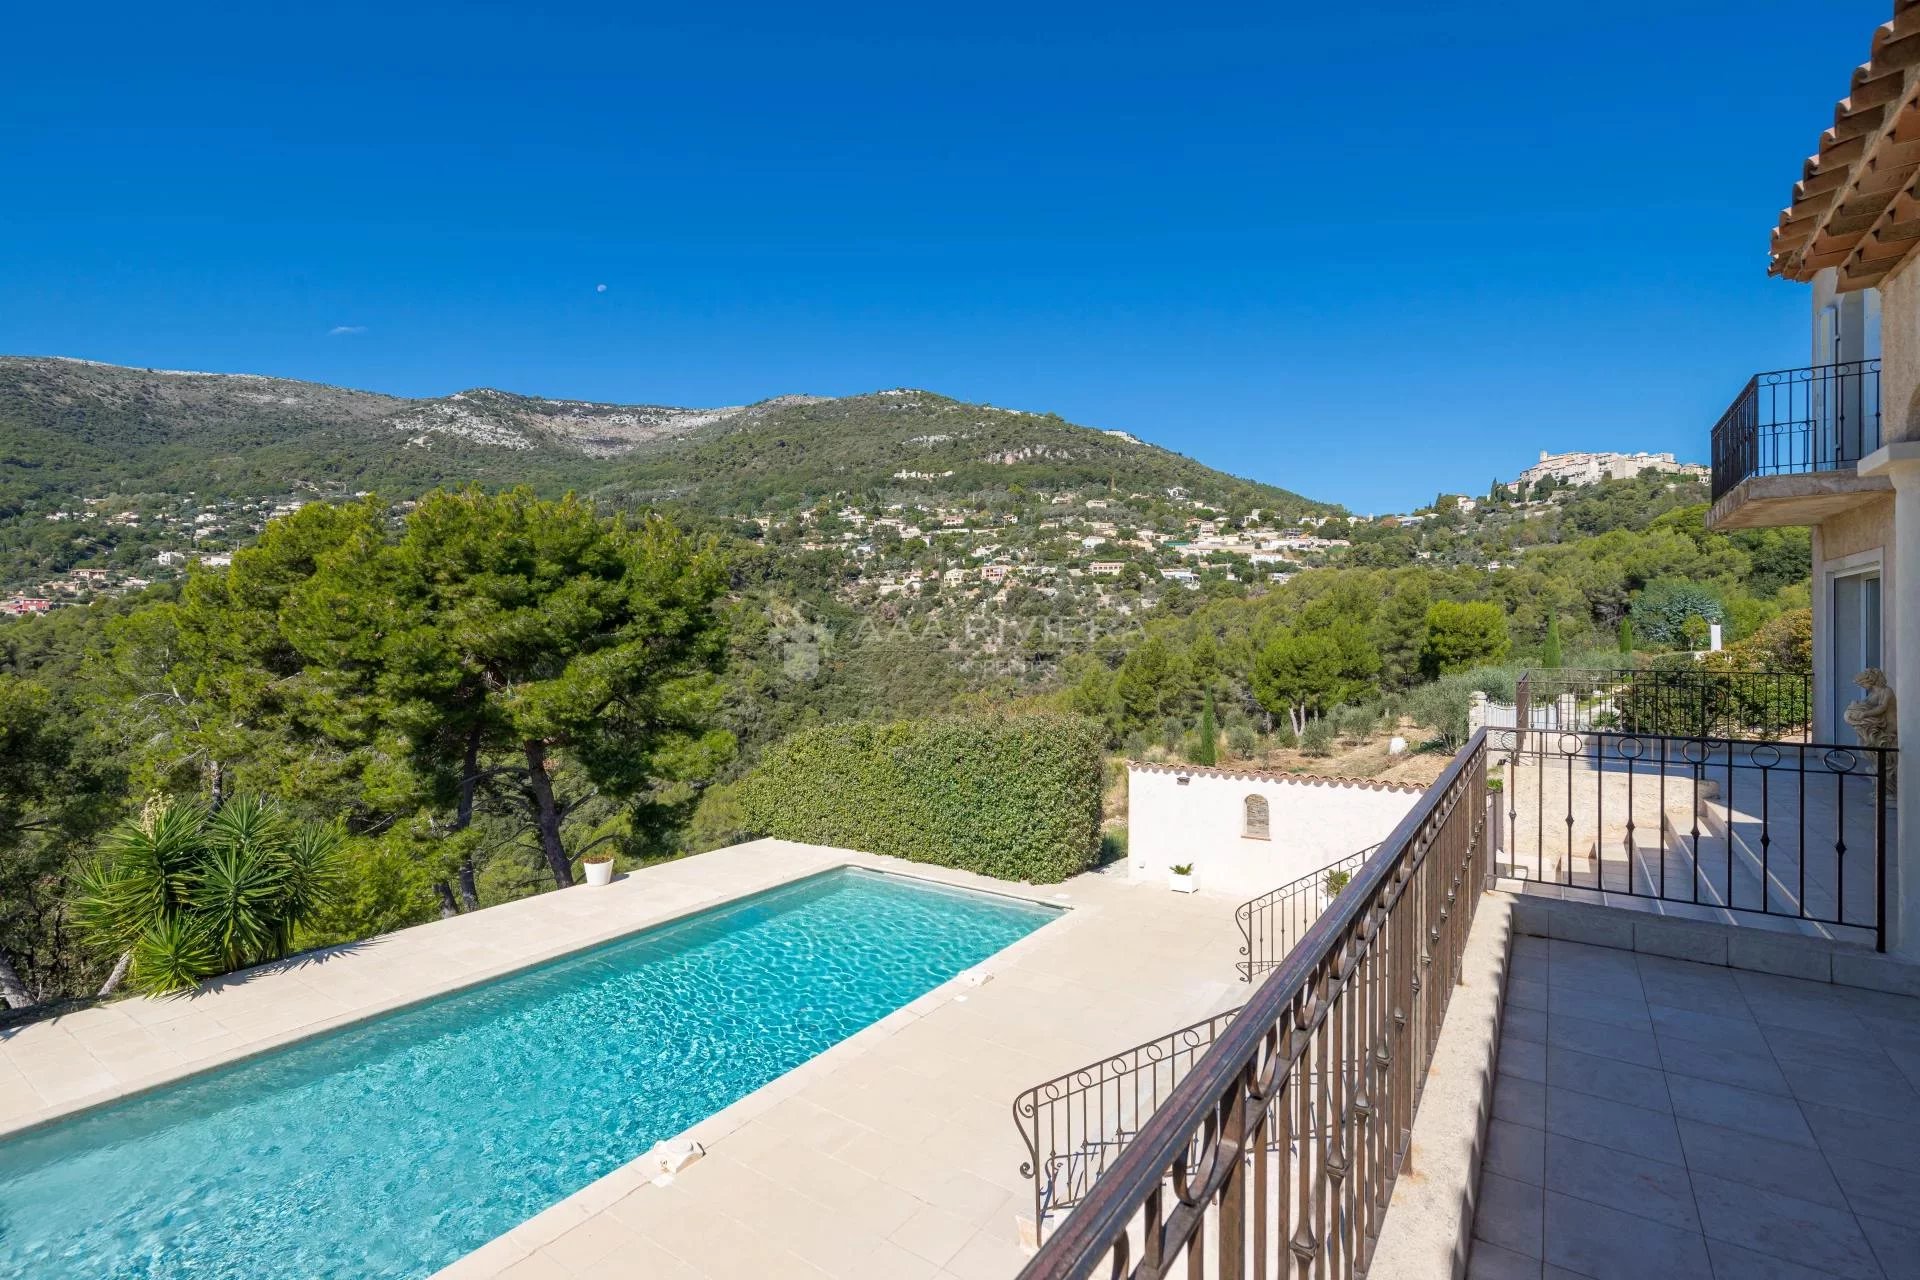 UNDER OFFER -Carros - Family villa of 5 bedroom with swimming pool and beautiful panoramic view in a residential and green area